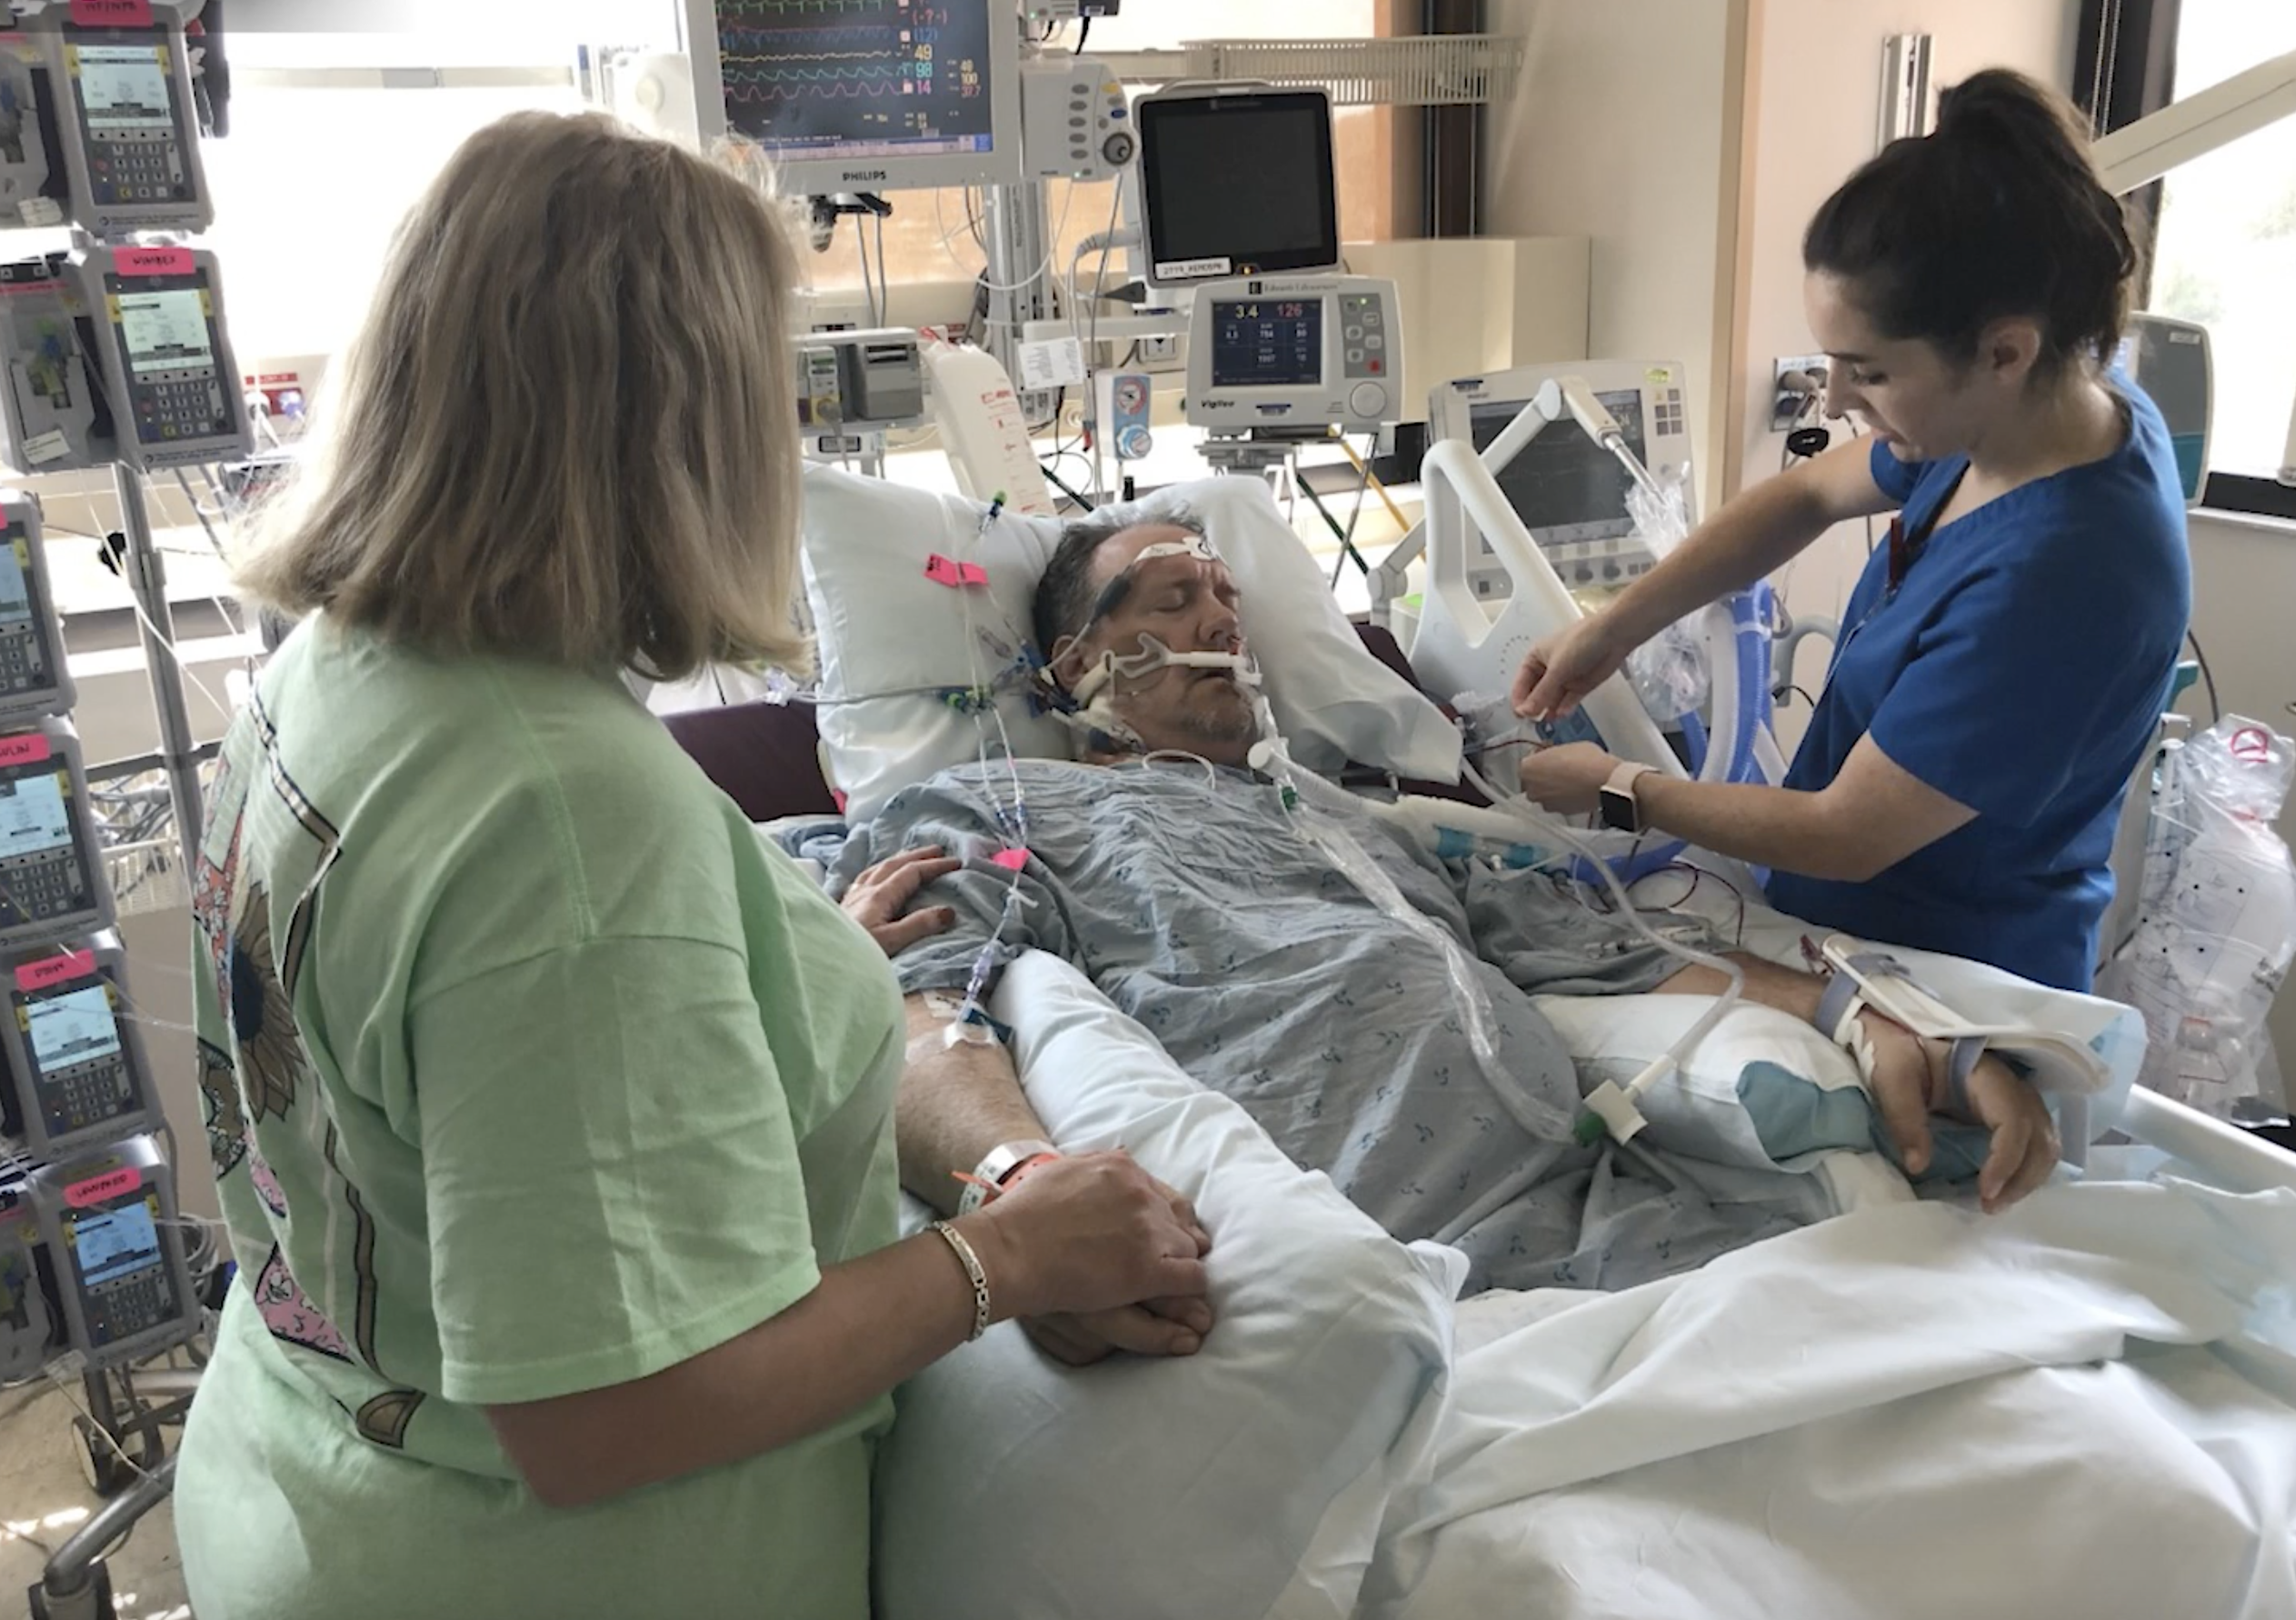 Roy Reid in recover after surgery in 2019. Photo provided by AdventHealth Orlando